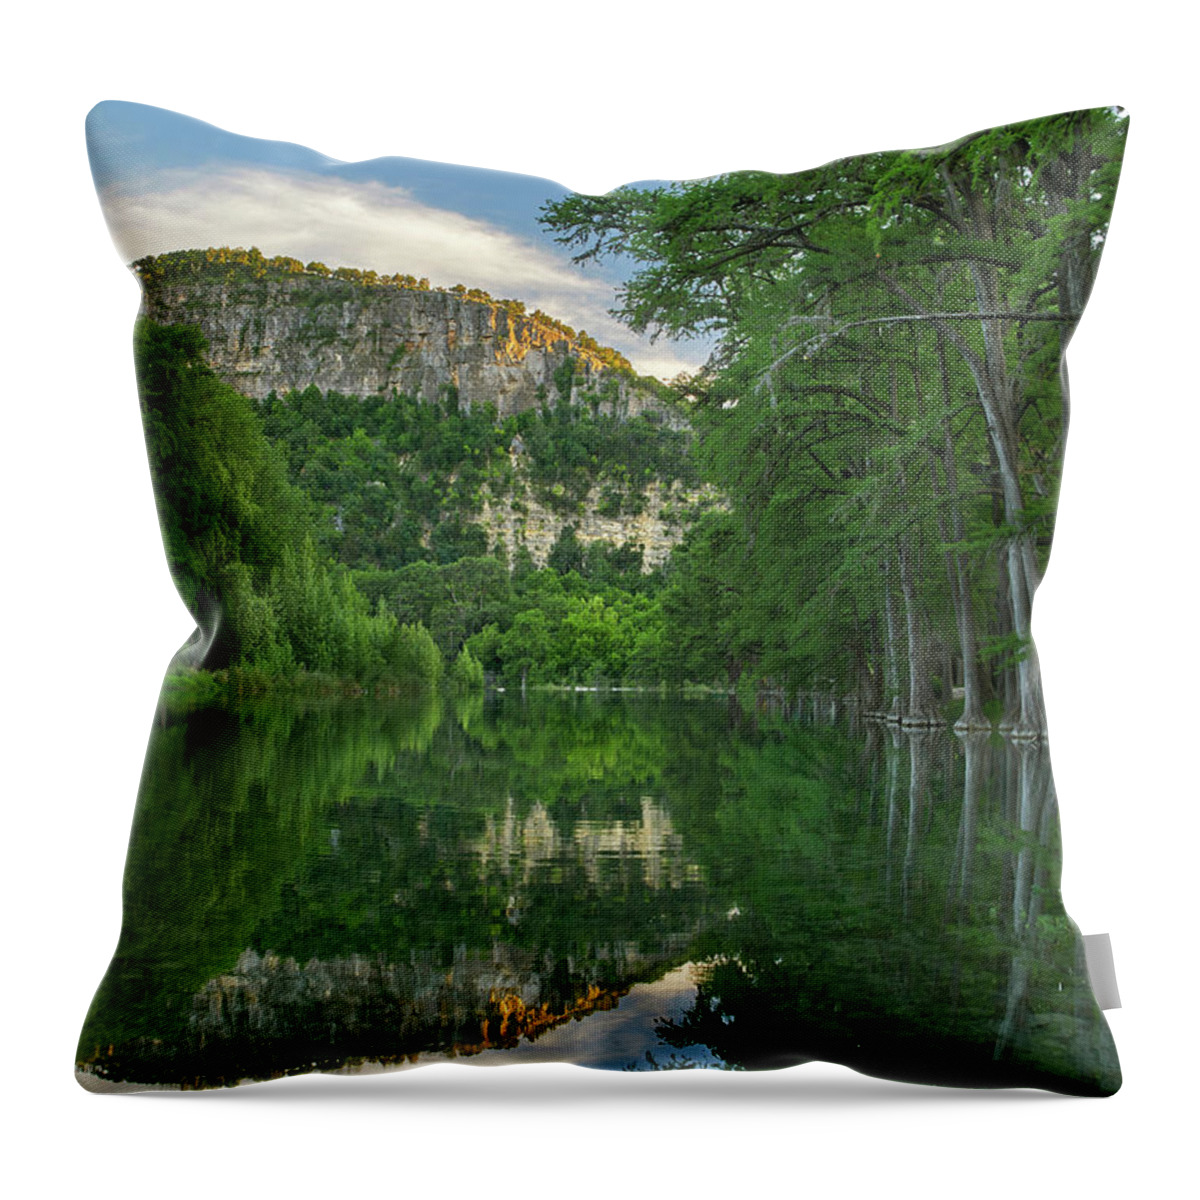 00567591 Throw Pillow featuring the photograph Bald Cypress Trees Along River, Frio River, Old Baldy Mountain, Garner State Park, Texas #1 by Tim Fitzharris